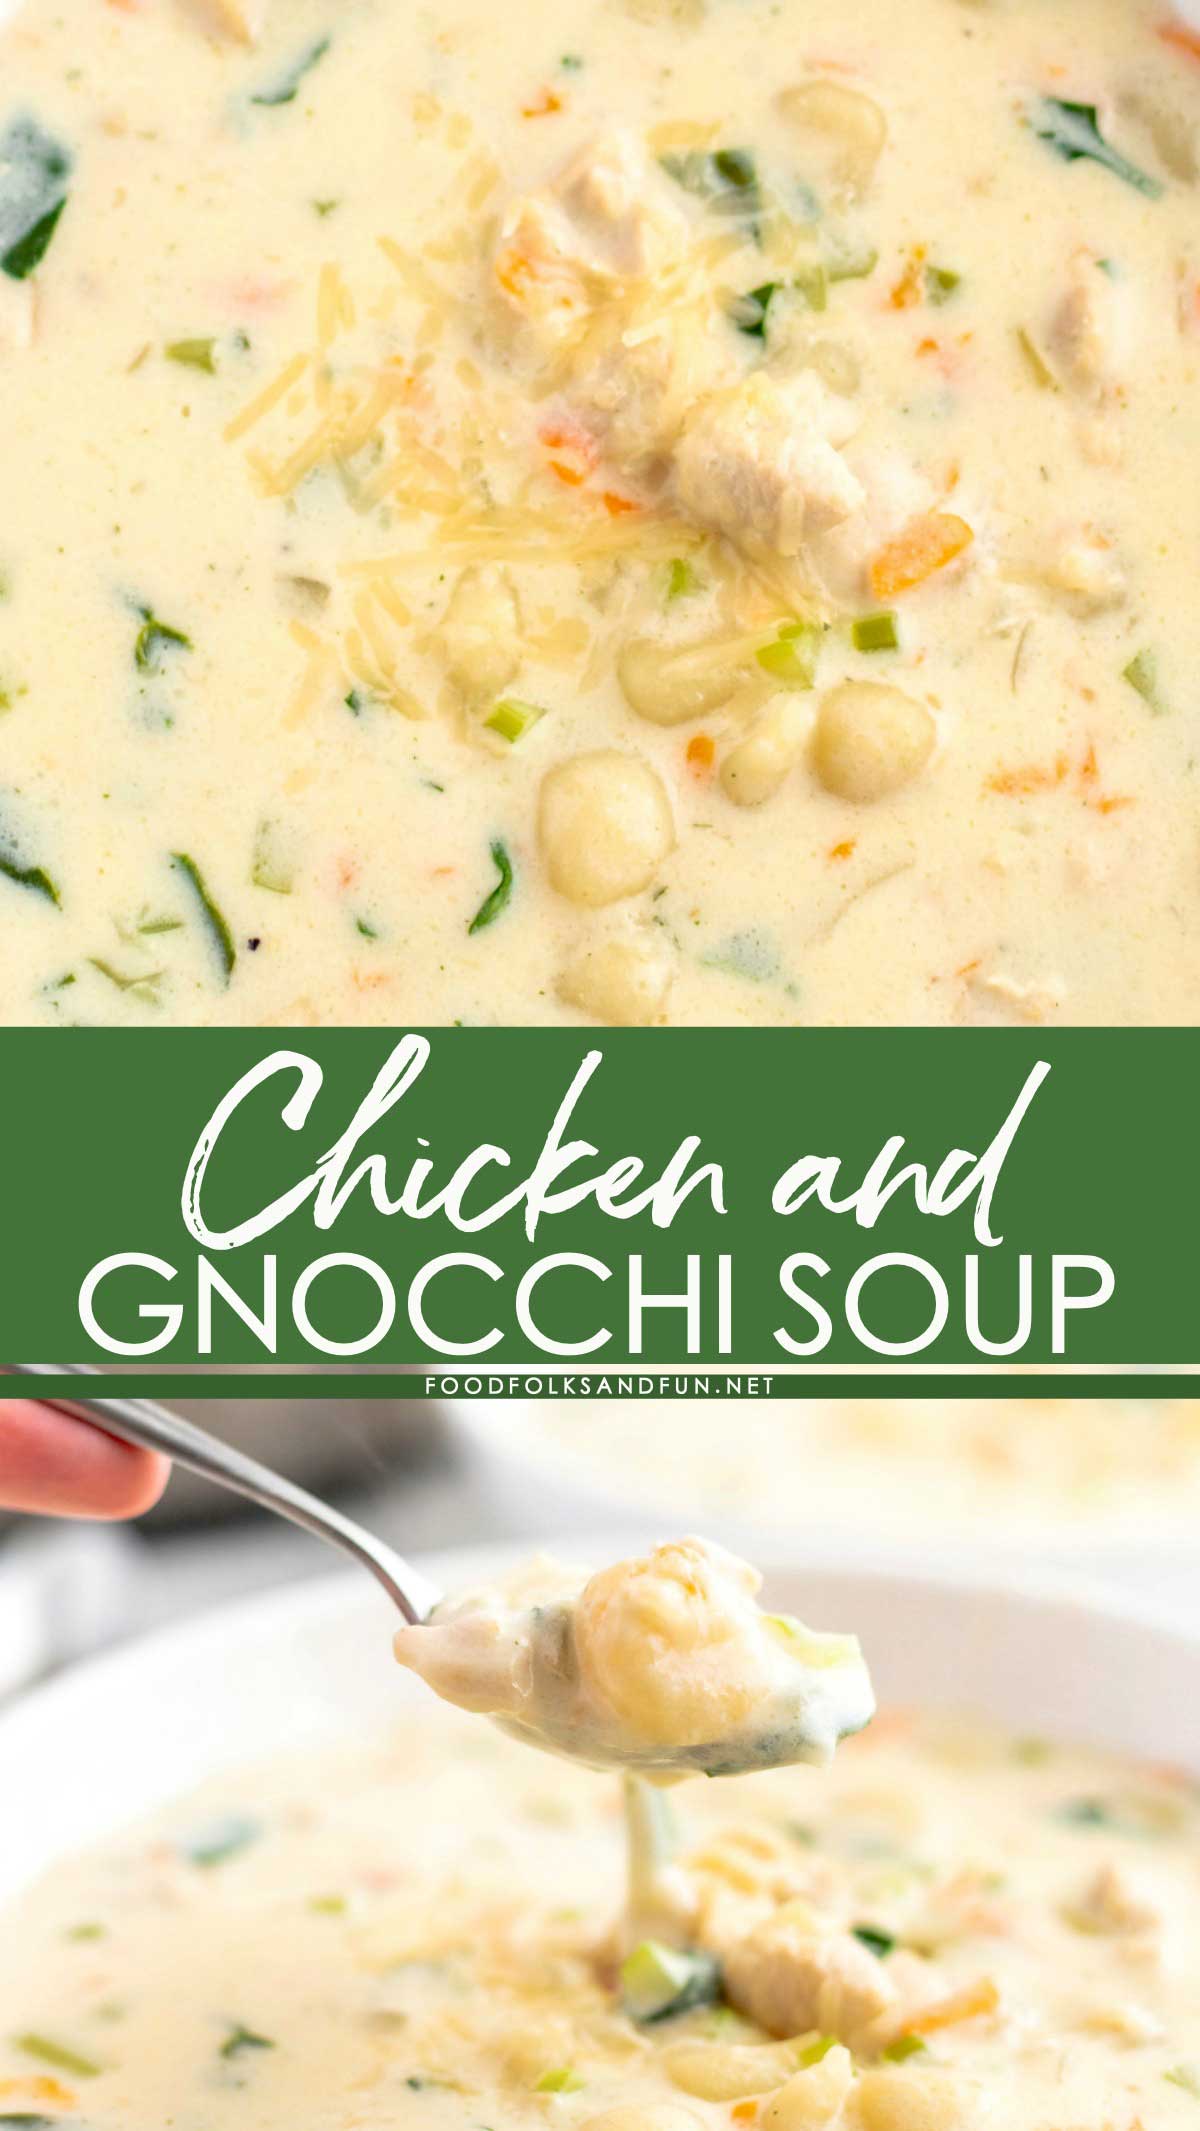 This Copycat Olive Garden Chicken and Gnocchi Soup recipe is better than the original! It serves 6 and costs $9.08 to make. That’s just $1.51 per serving! via @foodfolksandfun